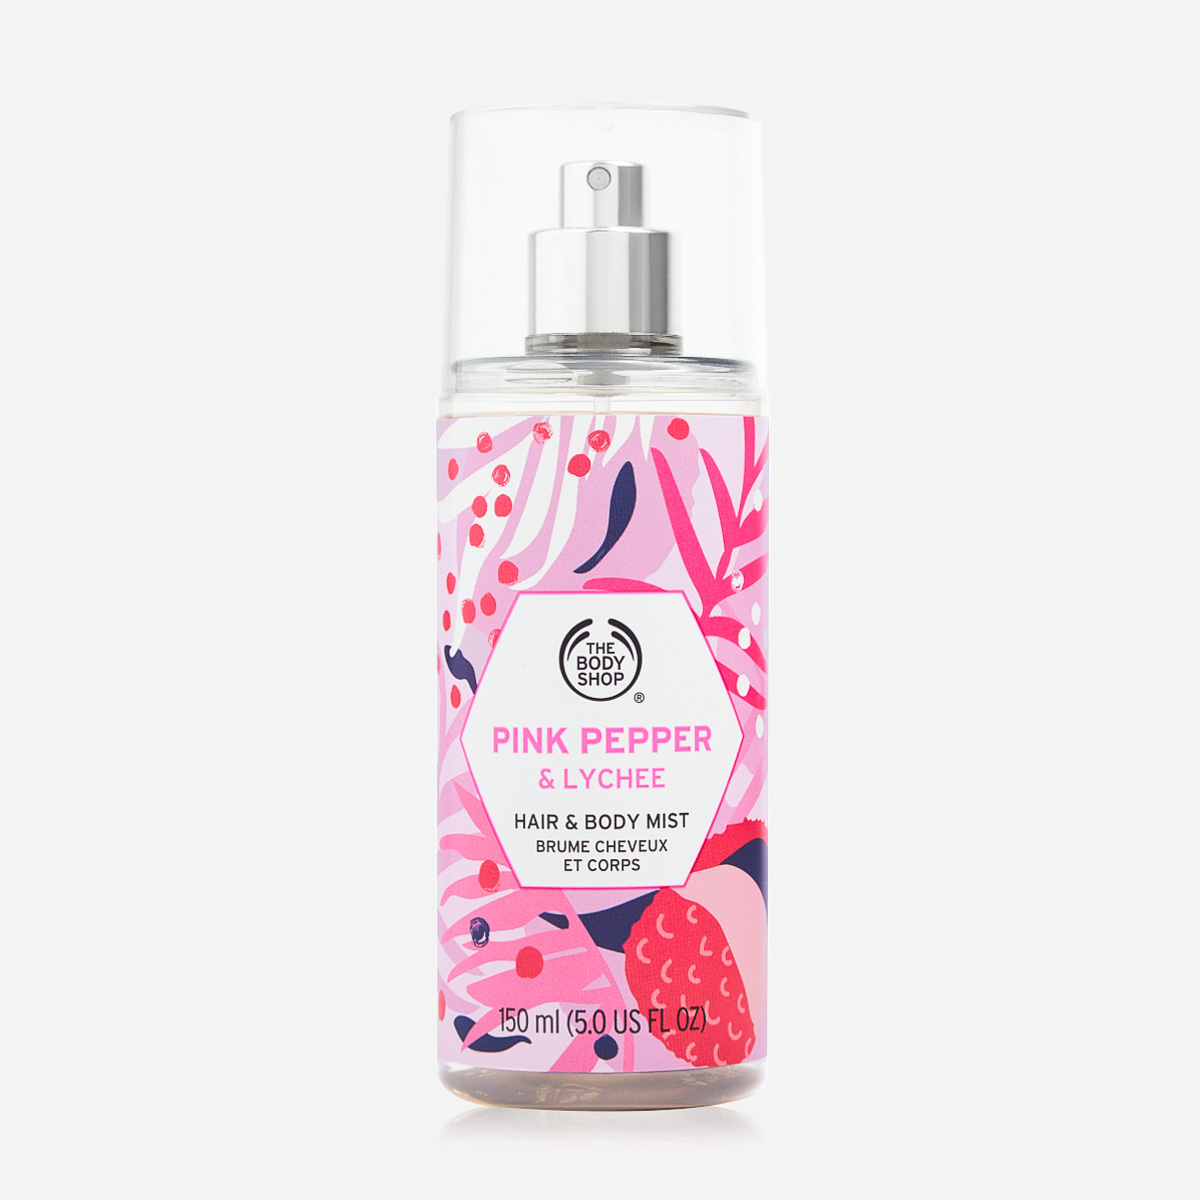 The Body Shop Pink Pepper and Lychee